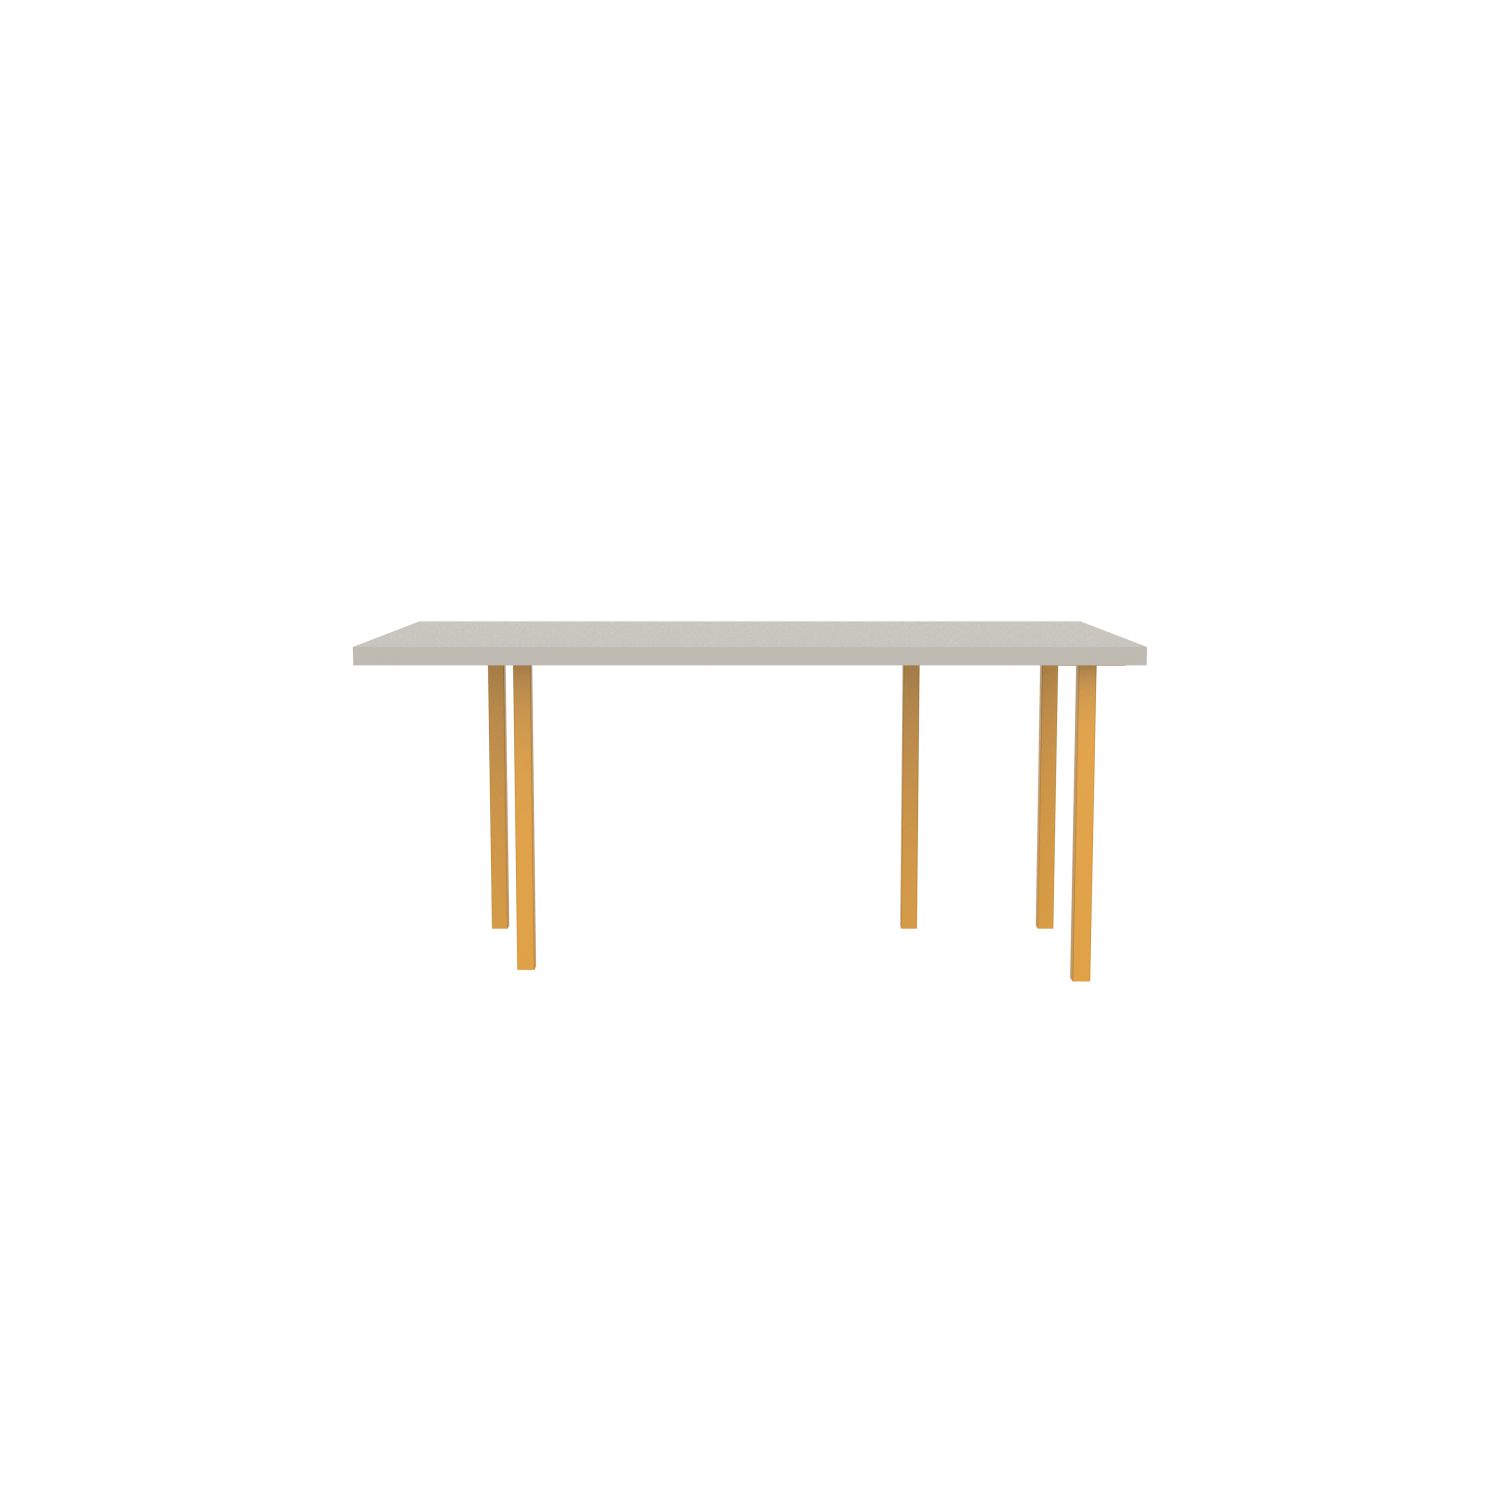 lensvelt bbrand table five fixed heigt 915x172 hpl white 50 mm price level 1 yellow ral1004